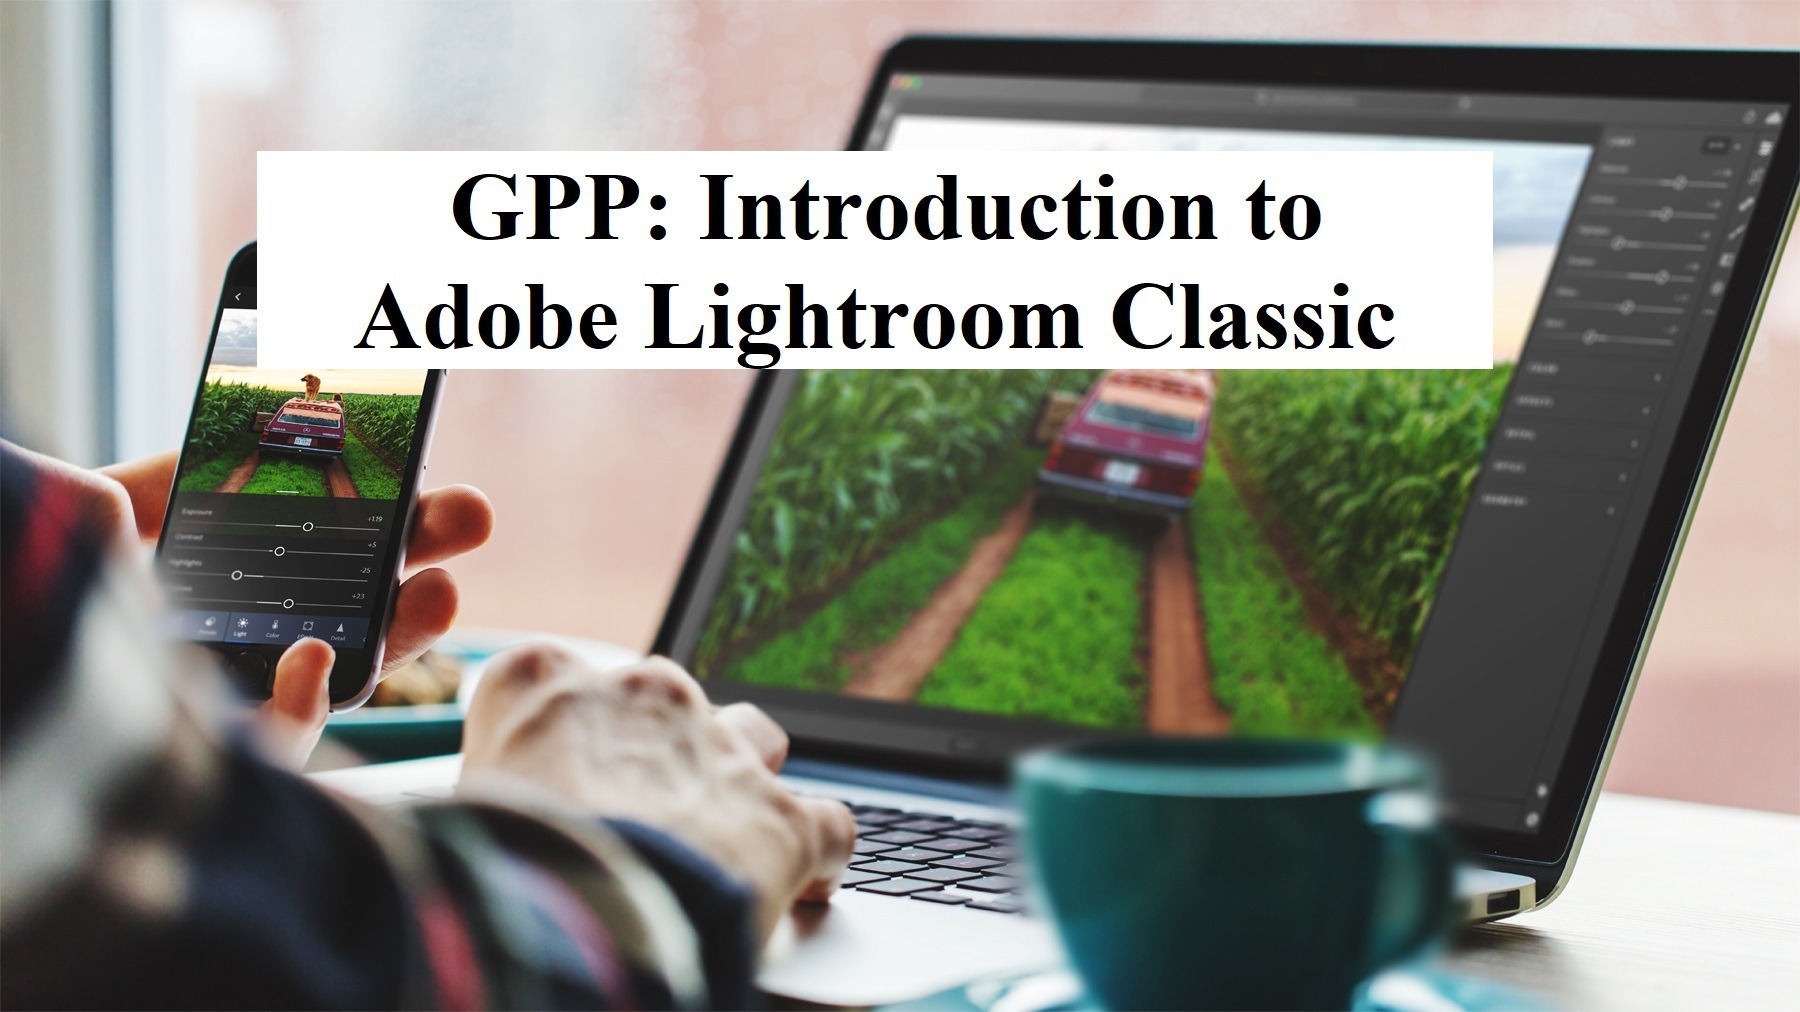 GPP: Introduction to Adobe Lightroom Classic - Coming Soon in UAE